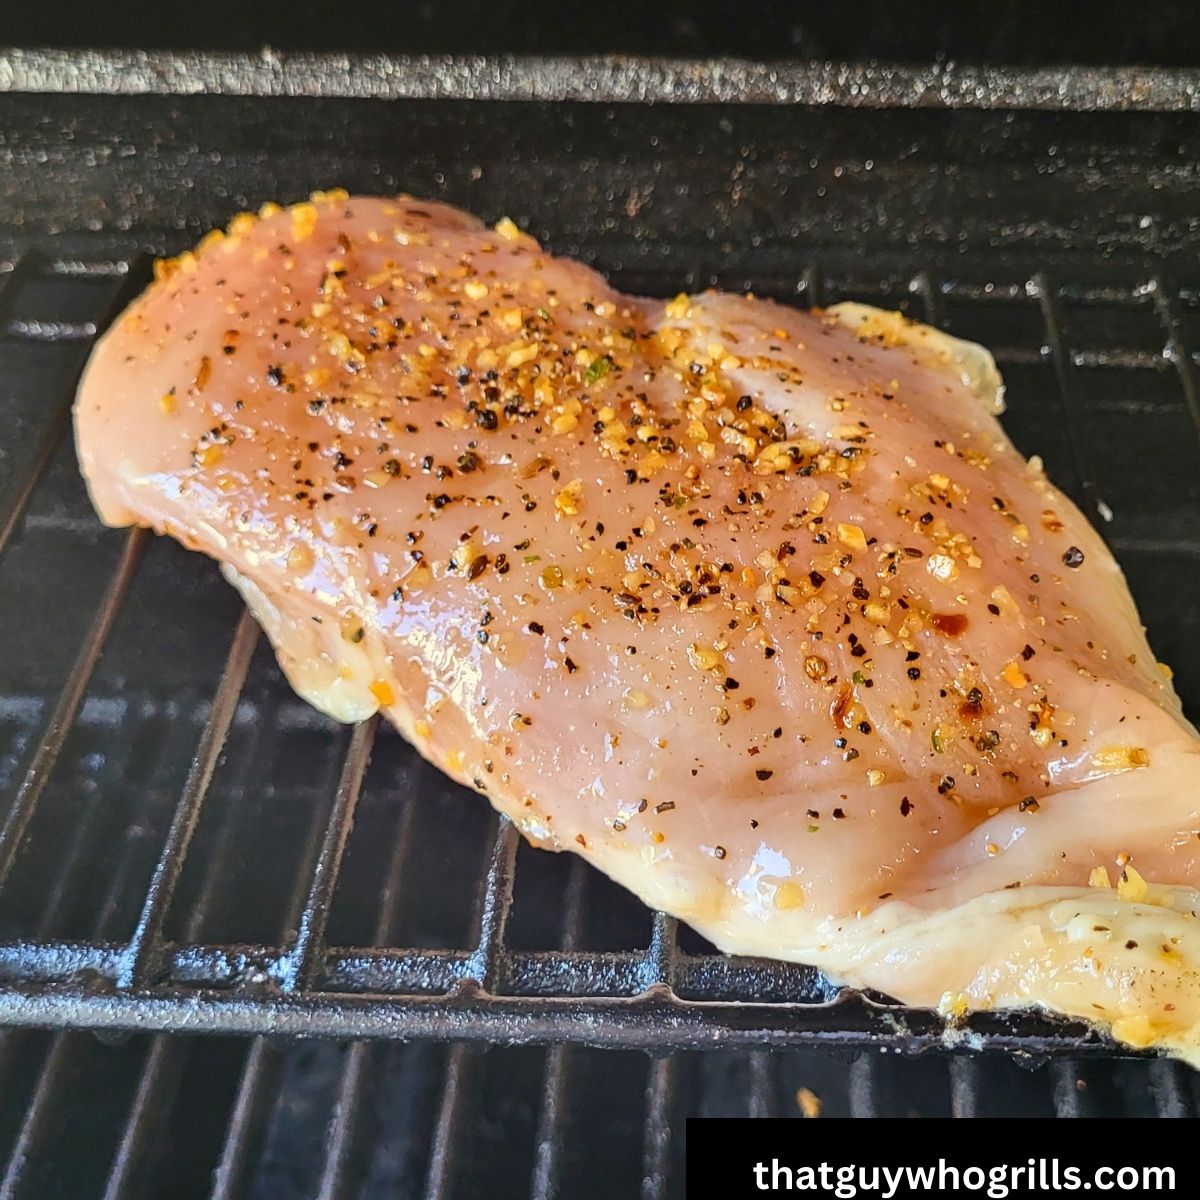 Seasoned Chicken breasts on a gas grill before cooking